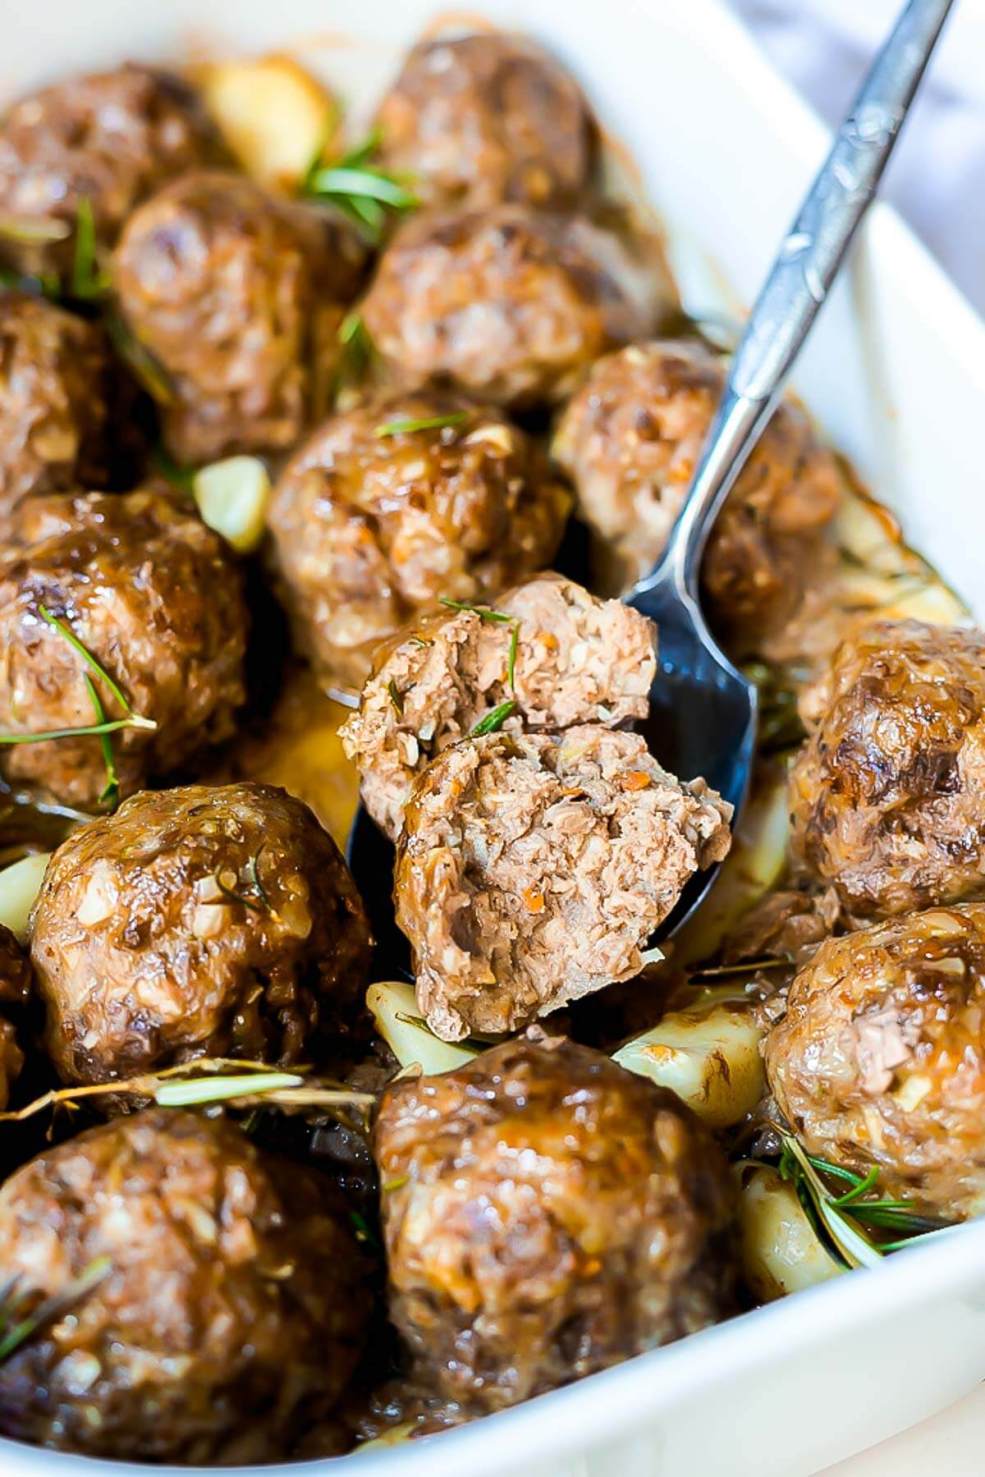 Garlic Rosemary Whole 30 Meatballs is one of our 25 Paleo Whole30 Recipes 